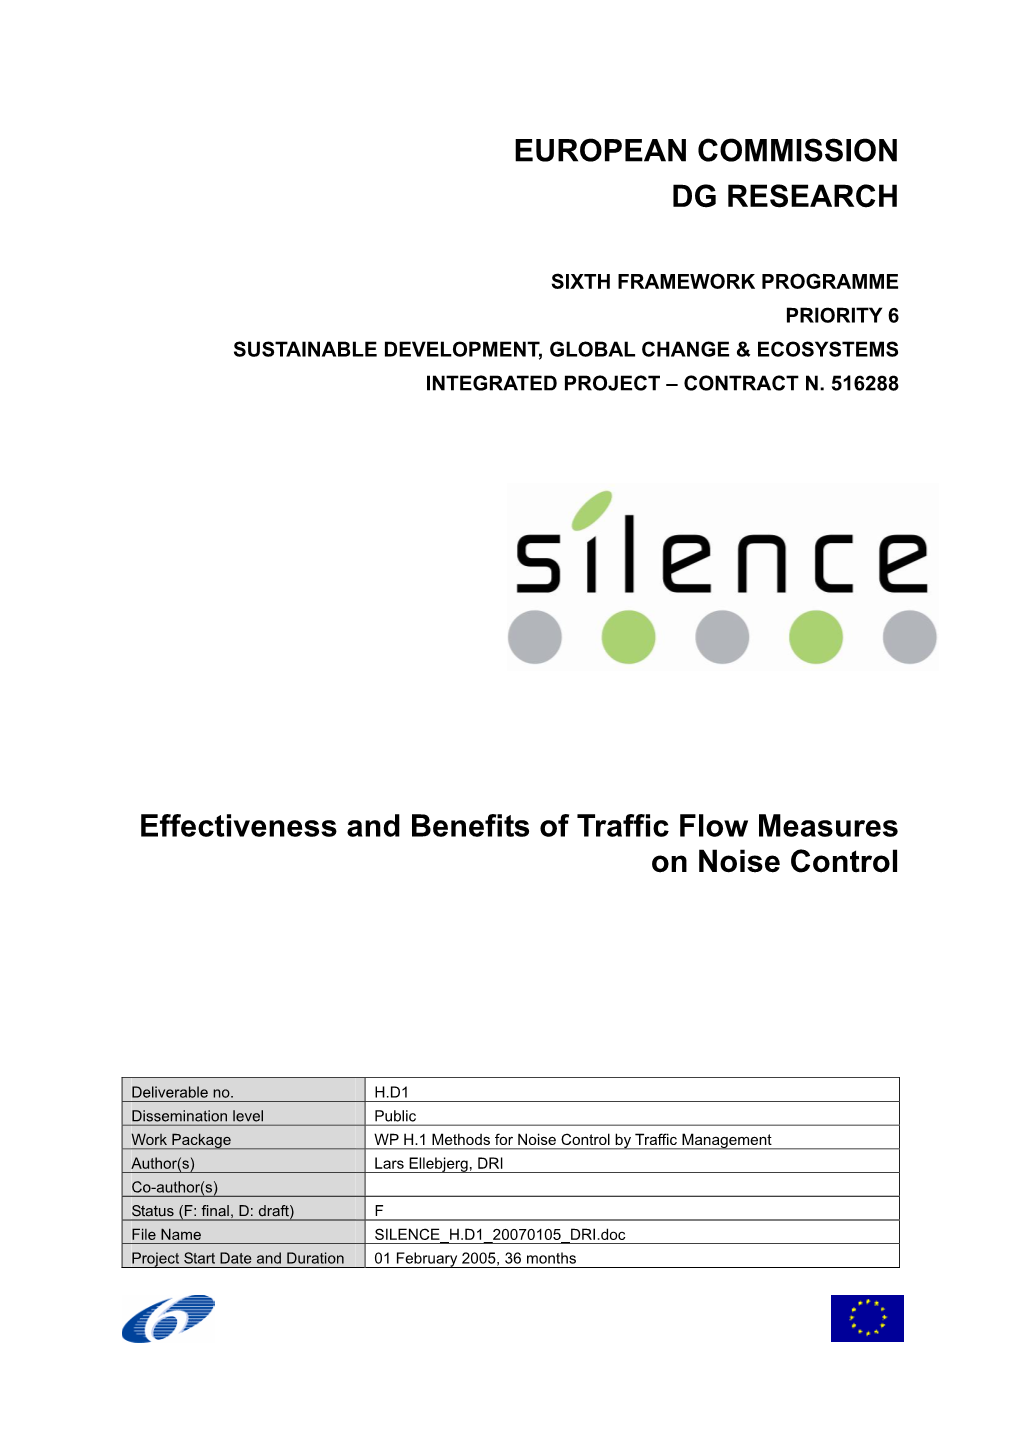 Effectiveness and Benefits of Traffic Flow Measures on Noise Control